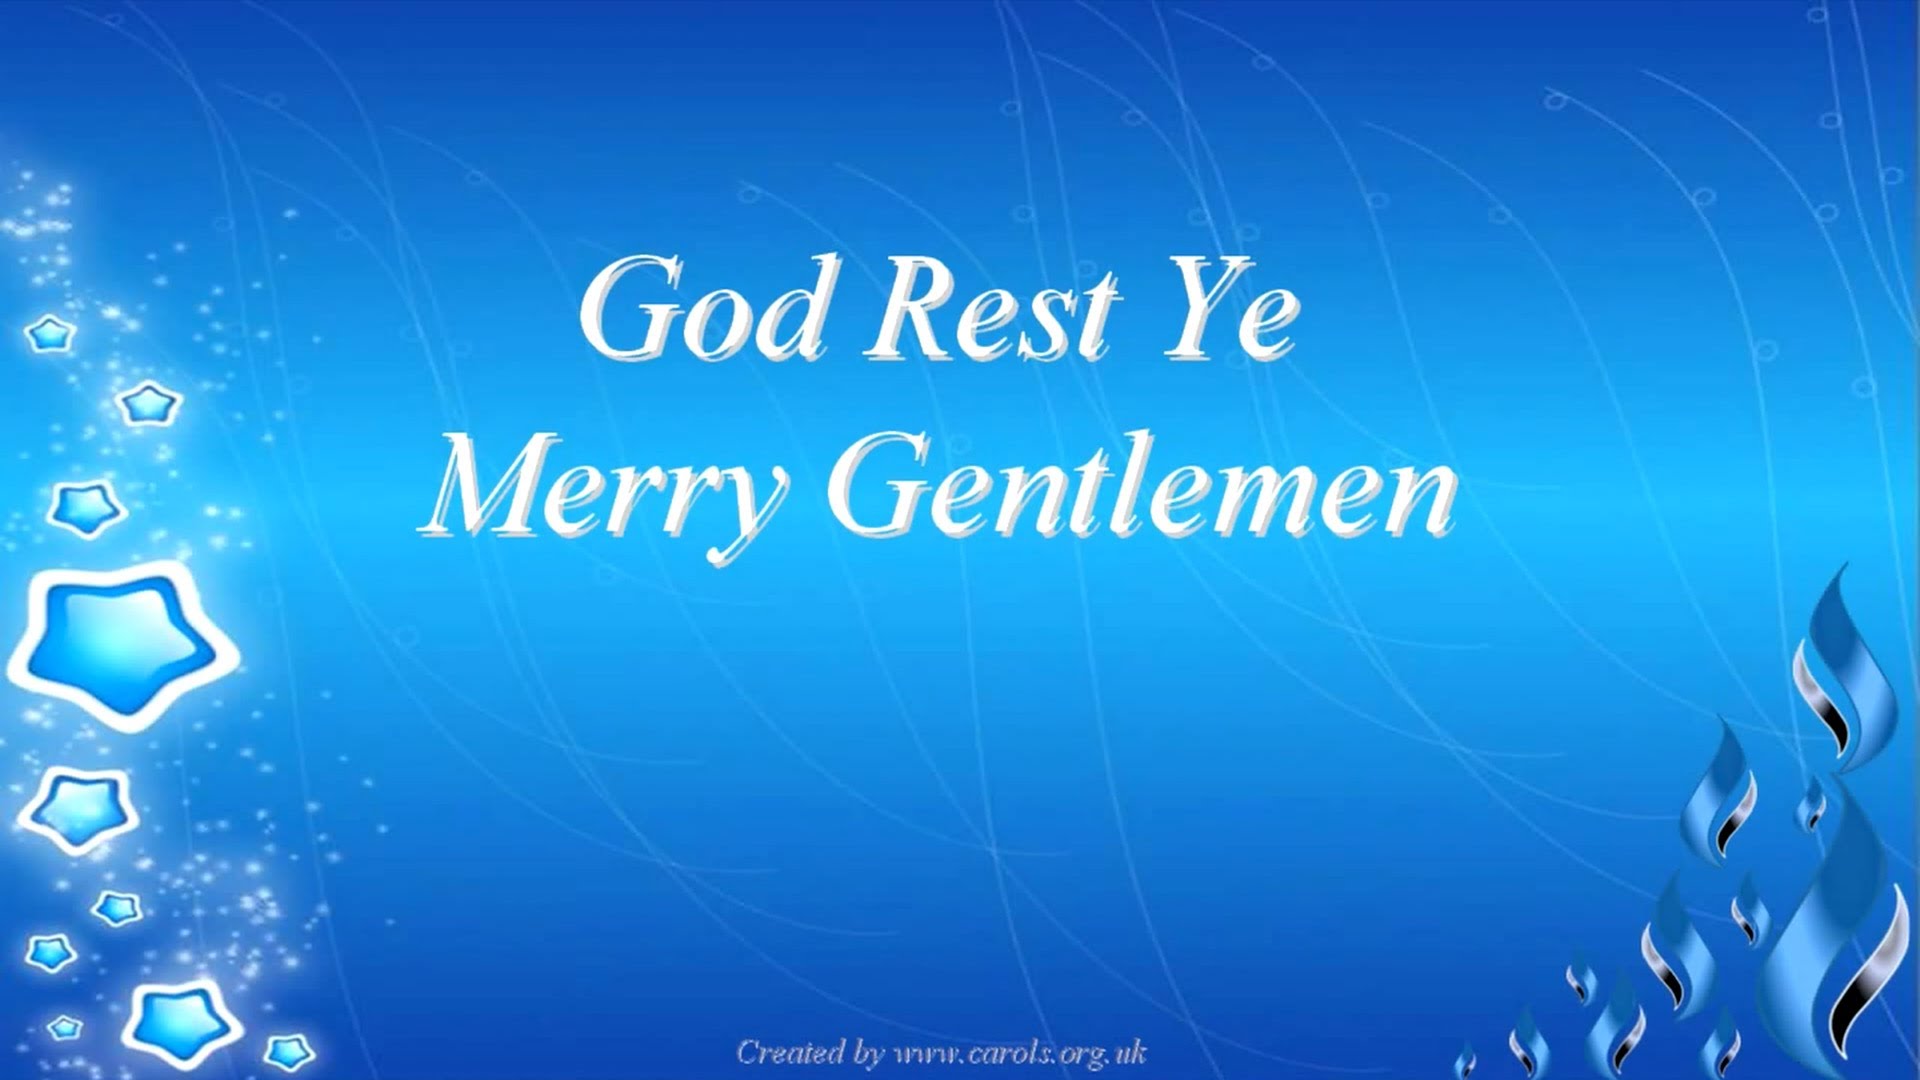 God Rest Ye Merry Gentlemen was first published in 1833 when it appeared in “Christmas Carols Ancient and Modern,” a collection of seasonal carols gathered by William B. Sandys. The lyrics of God Rest Ye Merry Gentlemen are traditional olde English and are reputed to date back to the 15th century